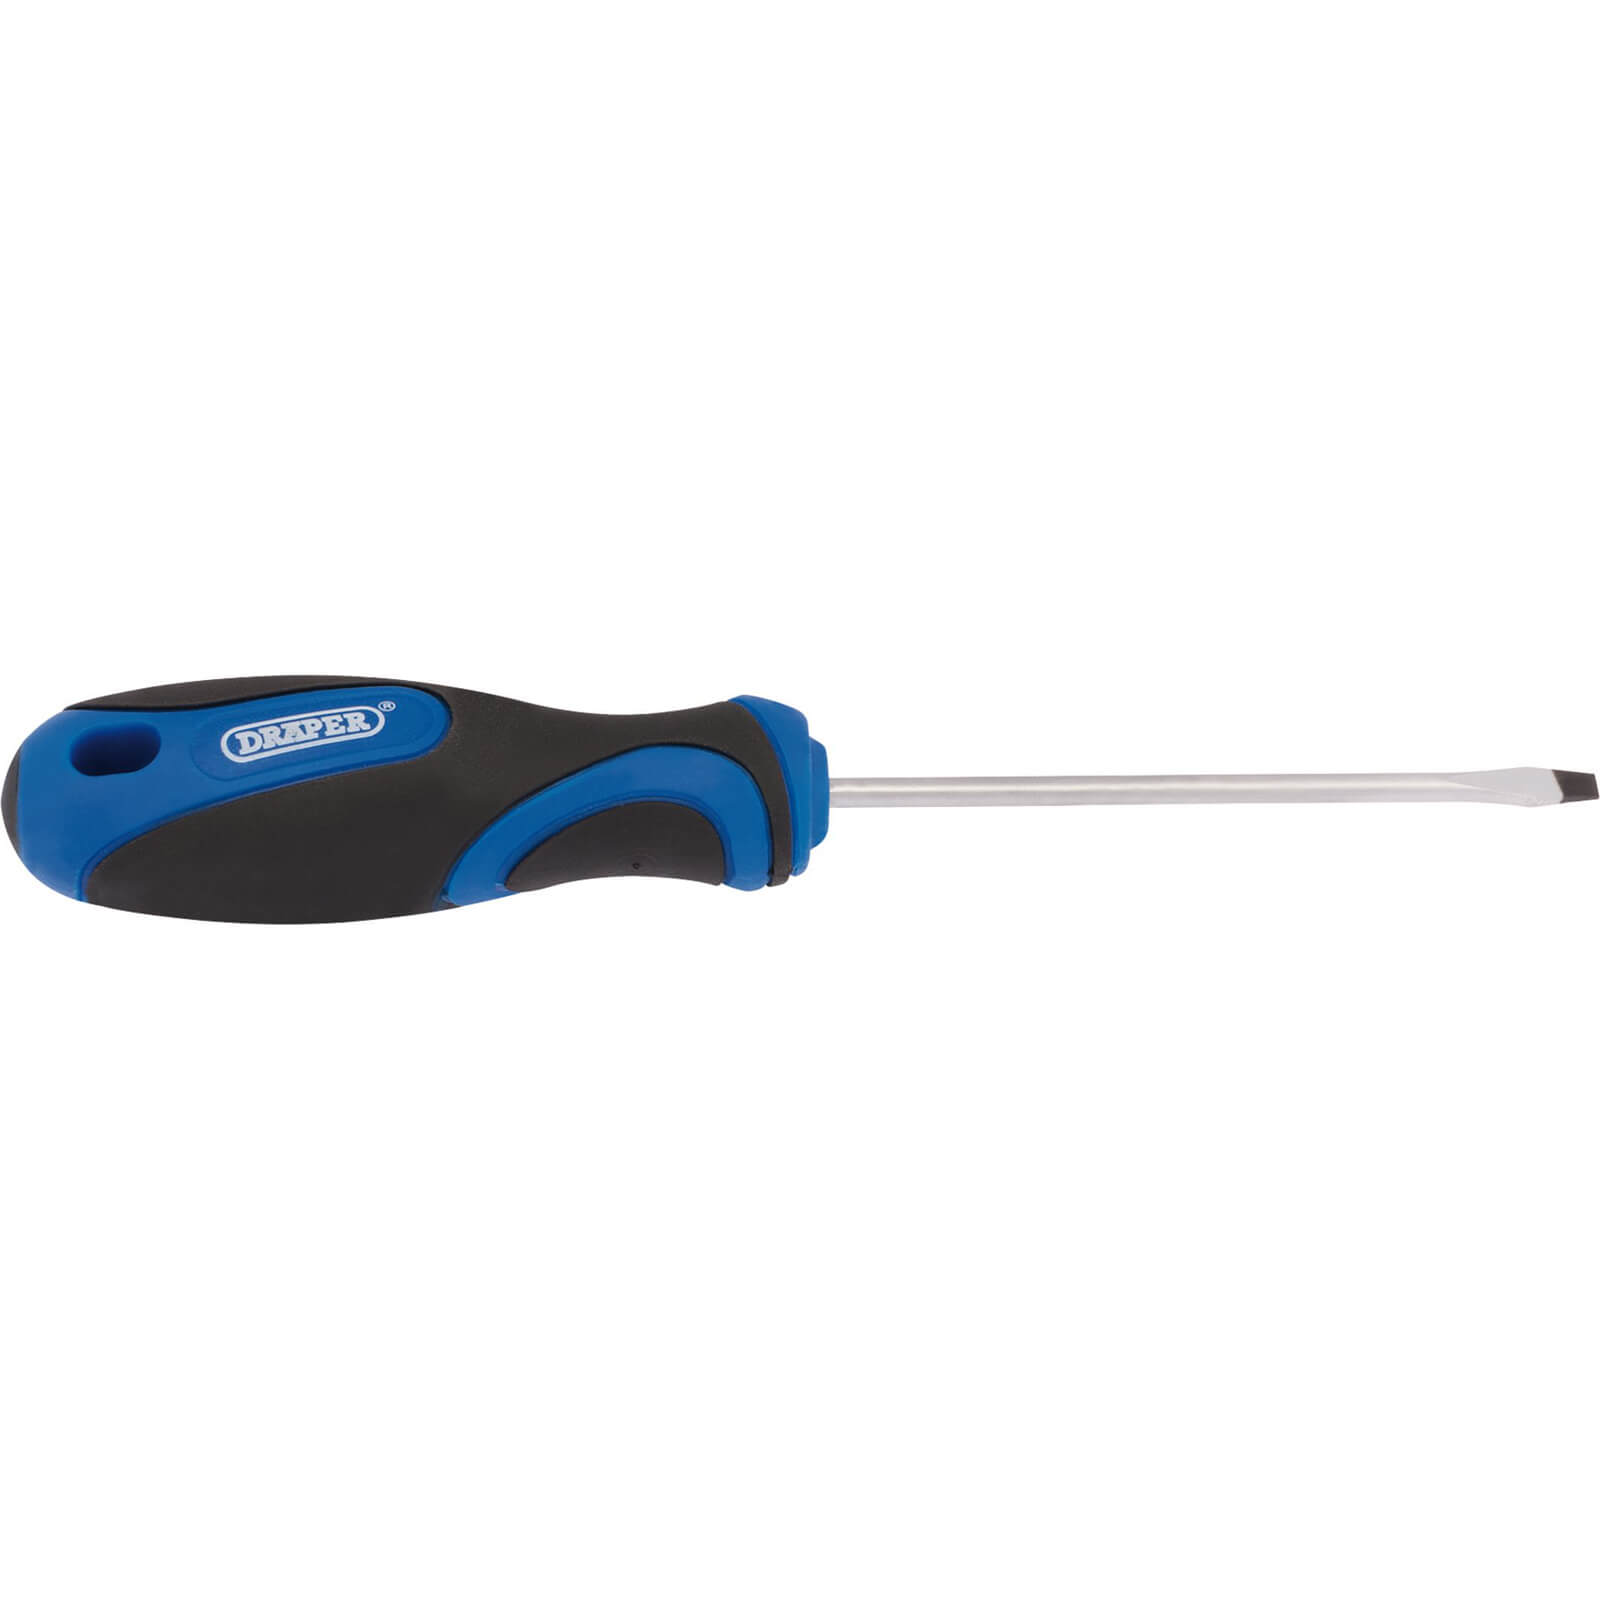 Image of Draper Flared Slotted Screwdriver 3.2mm 75mm